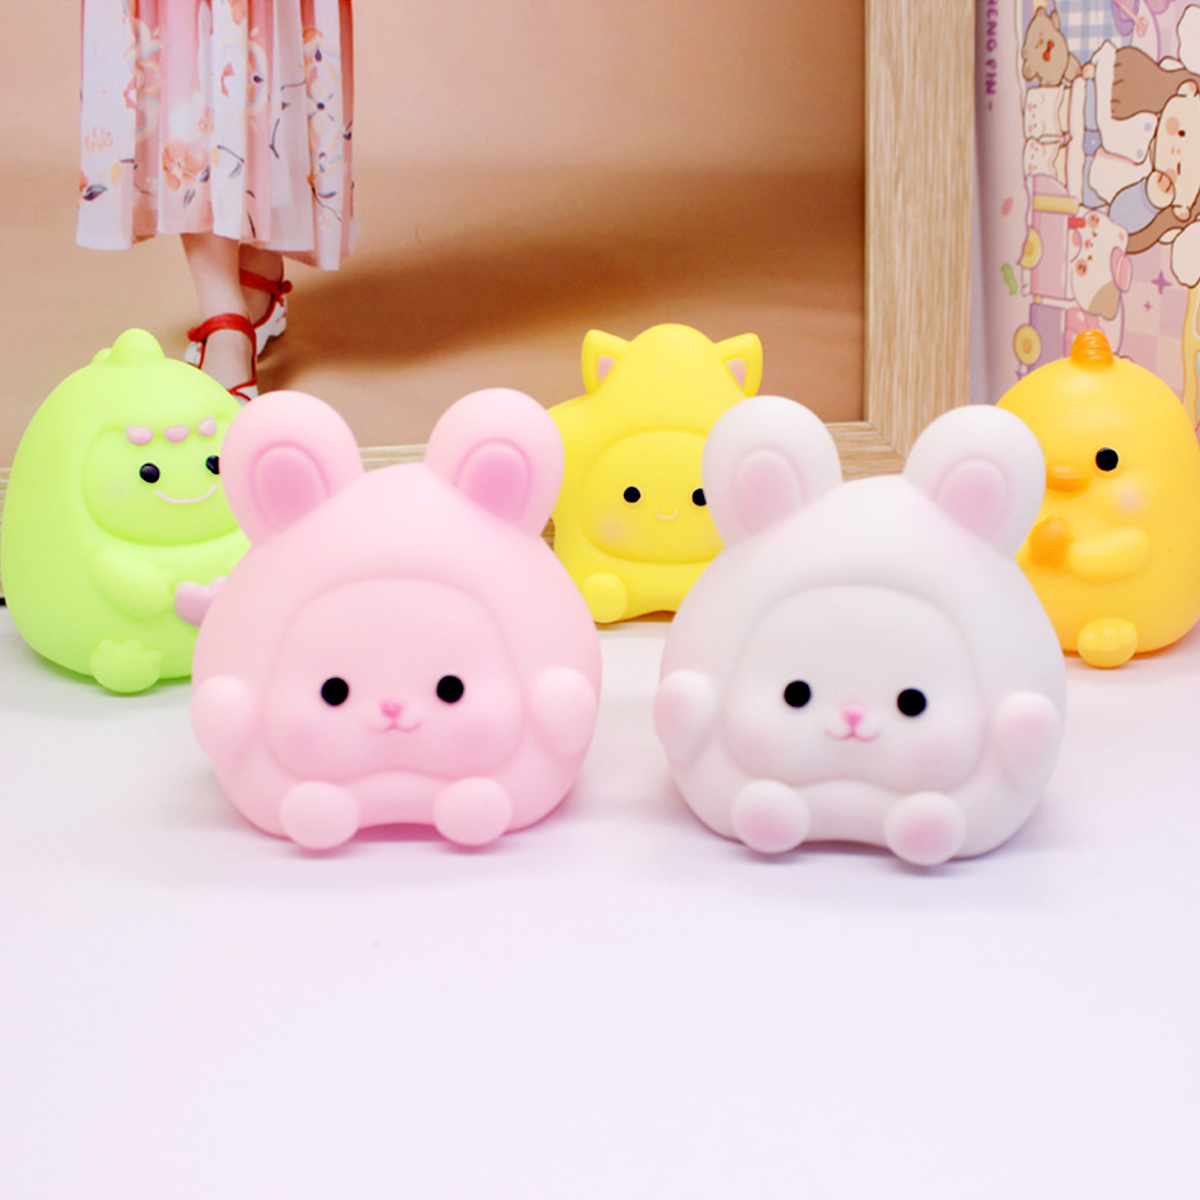 1pc cute cartoon animal night light powered by 3 ag13 button batteries free battery led sleeping light gift for boys and girls details 7